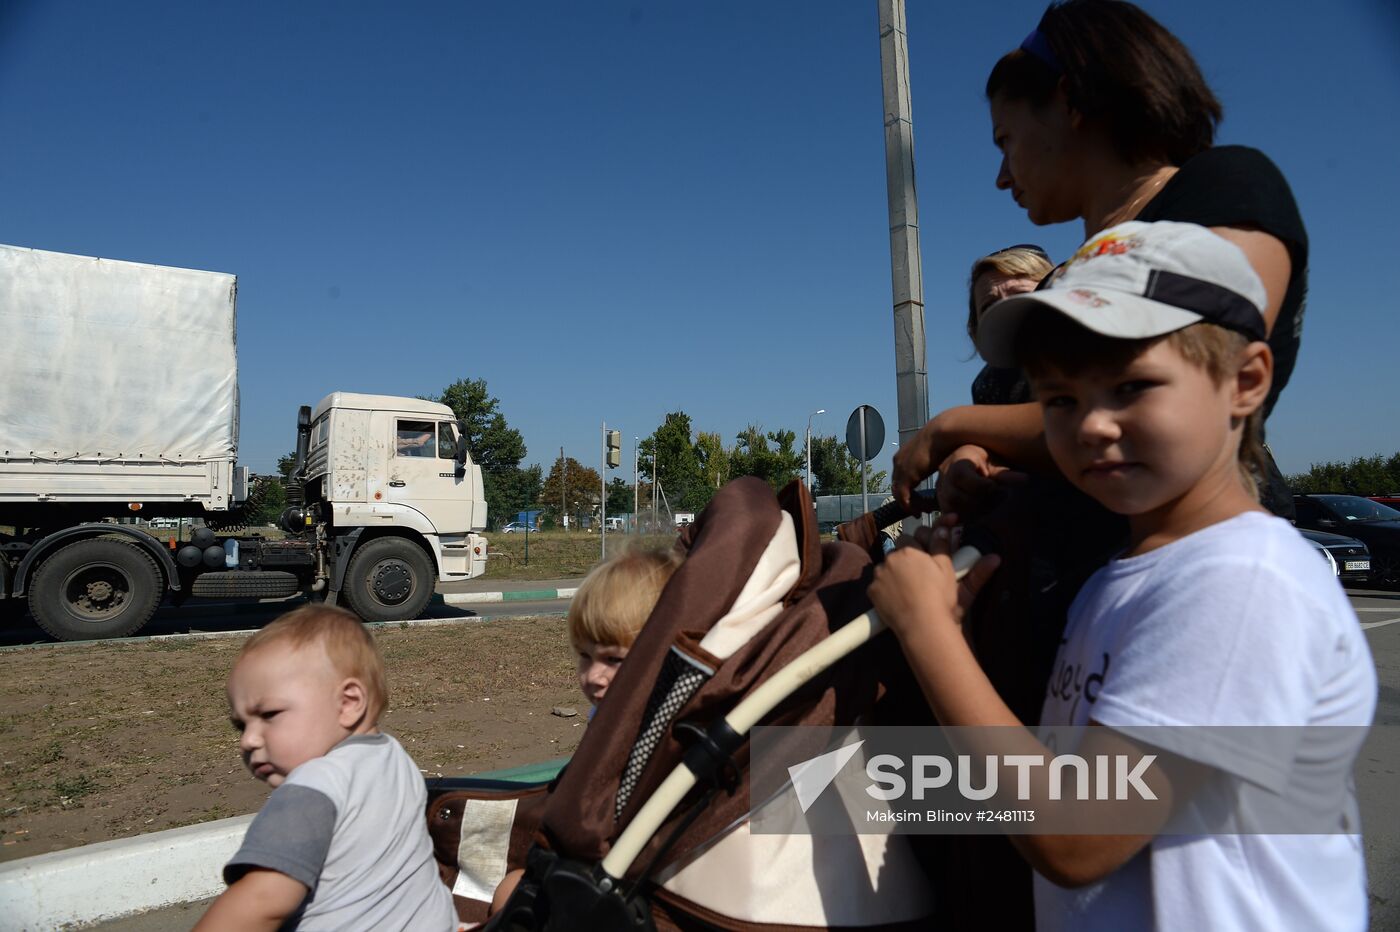 First trucks of Russia's humanitarian aid convoy come back from Ukraine